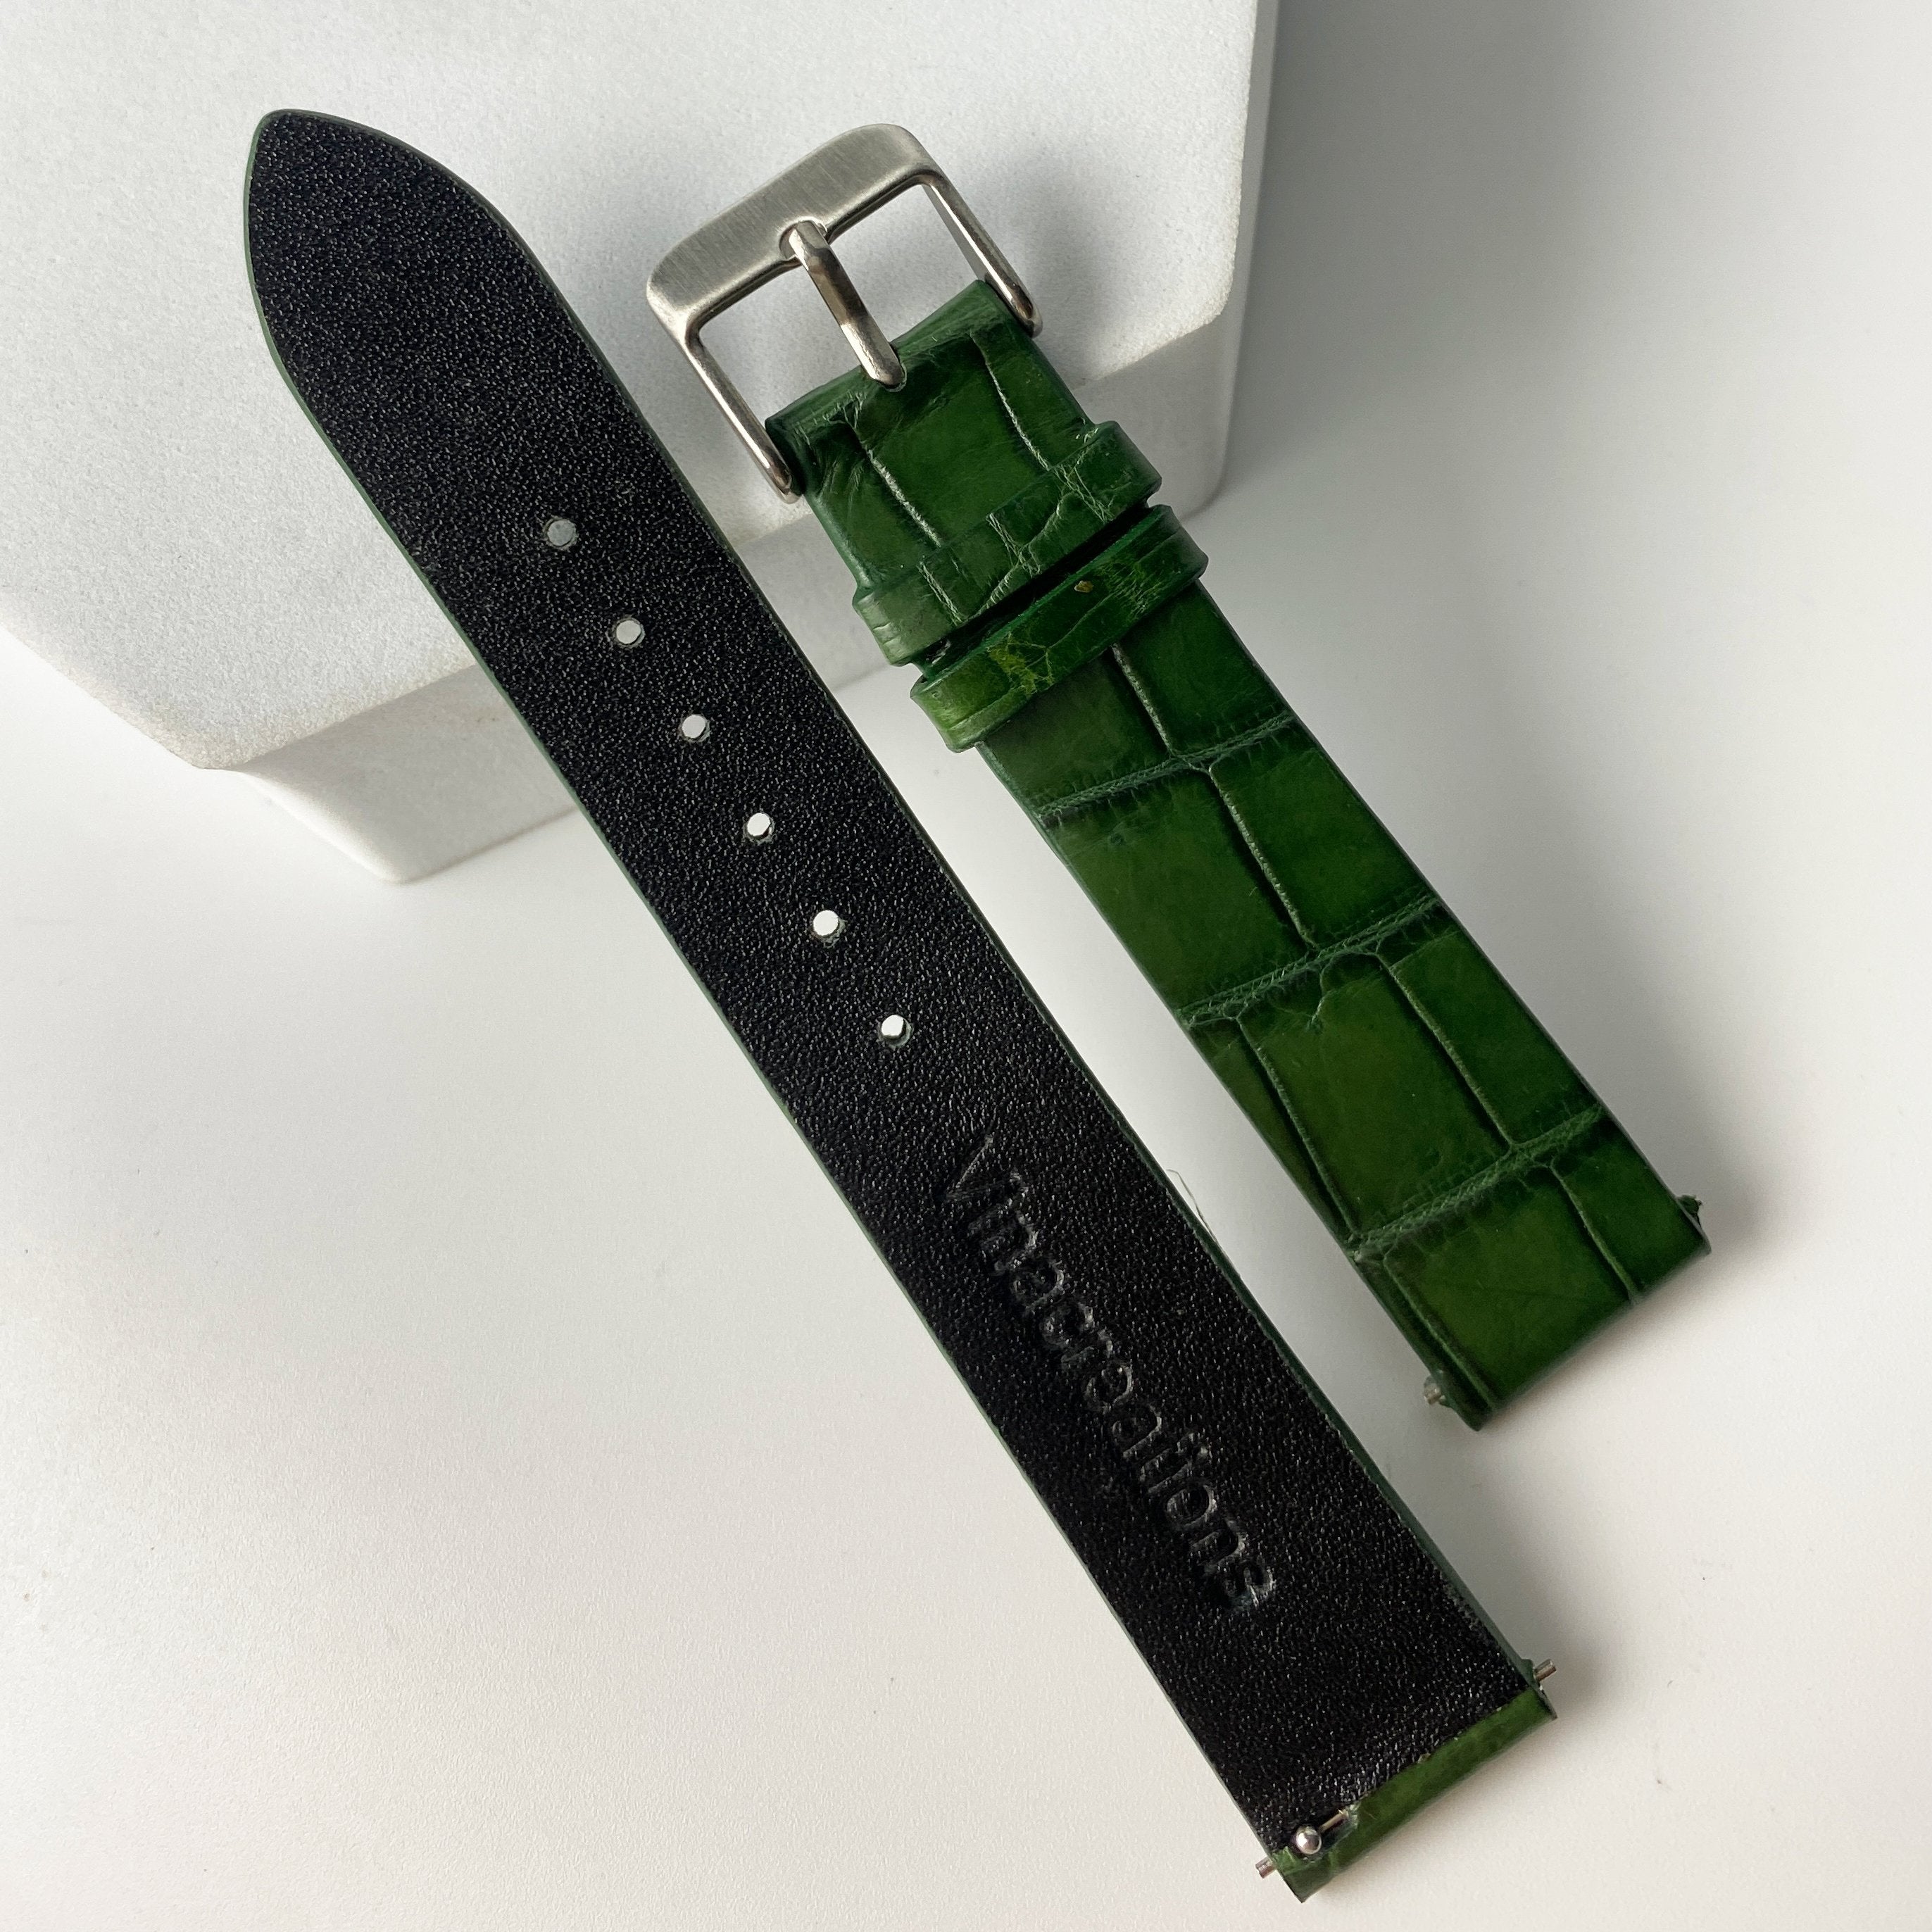 Green Alligator Leather Watch Band For Men | Premium Crocodile Quick Release Replacement Wristwatch Strap | DH-14 - Vinacreations